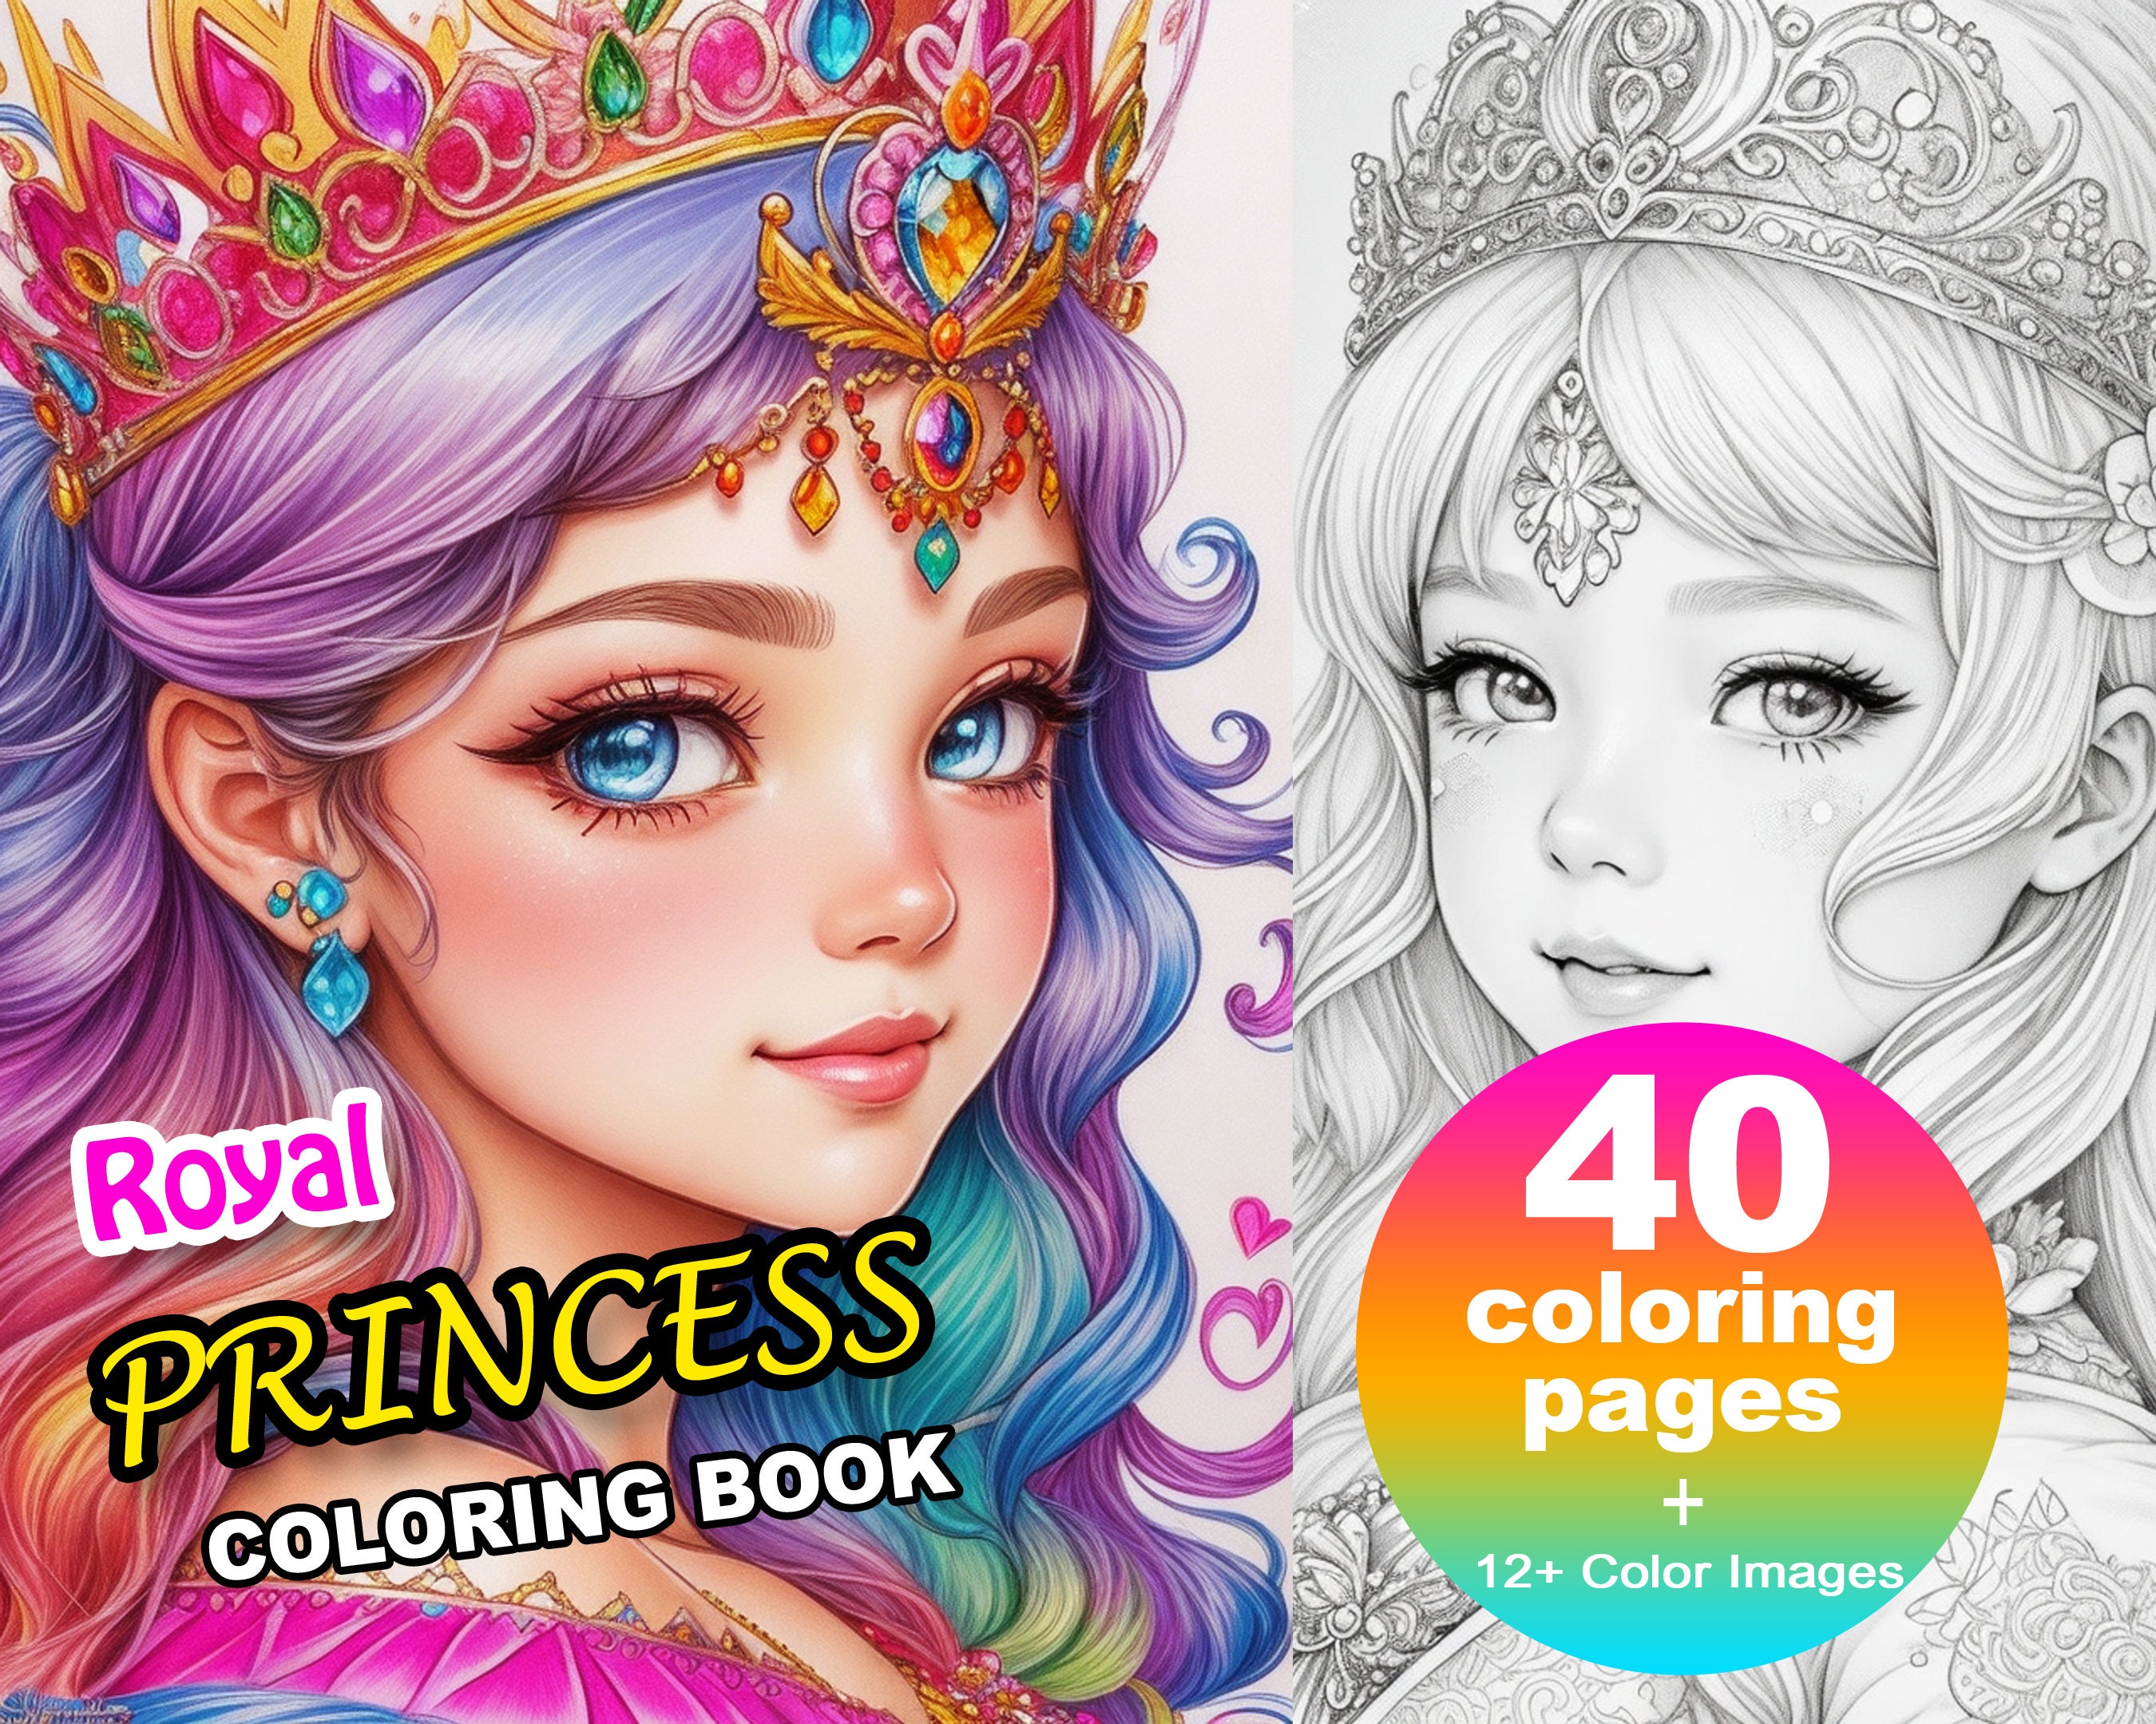 Princess Coloring Book For Kids, Girls And Adult (Unofficial